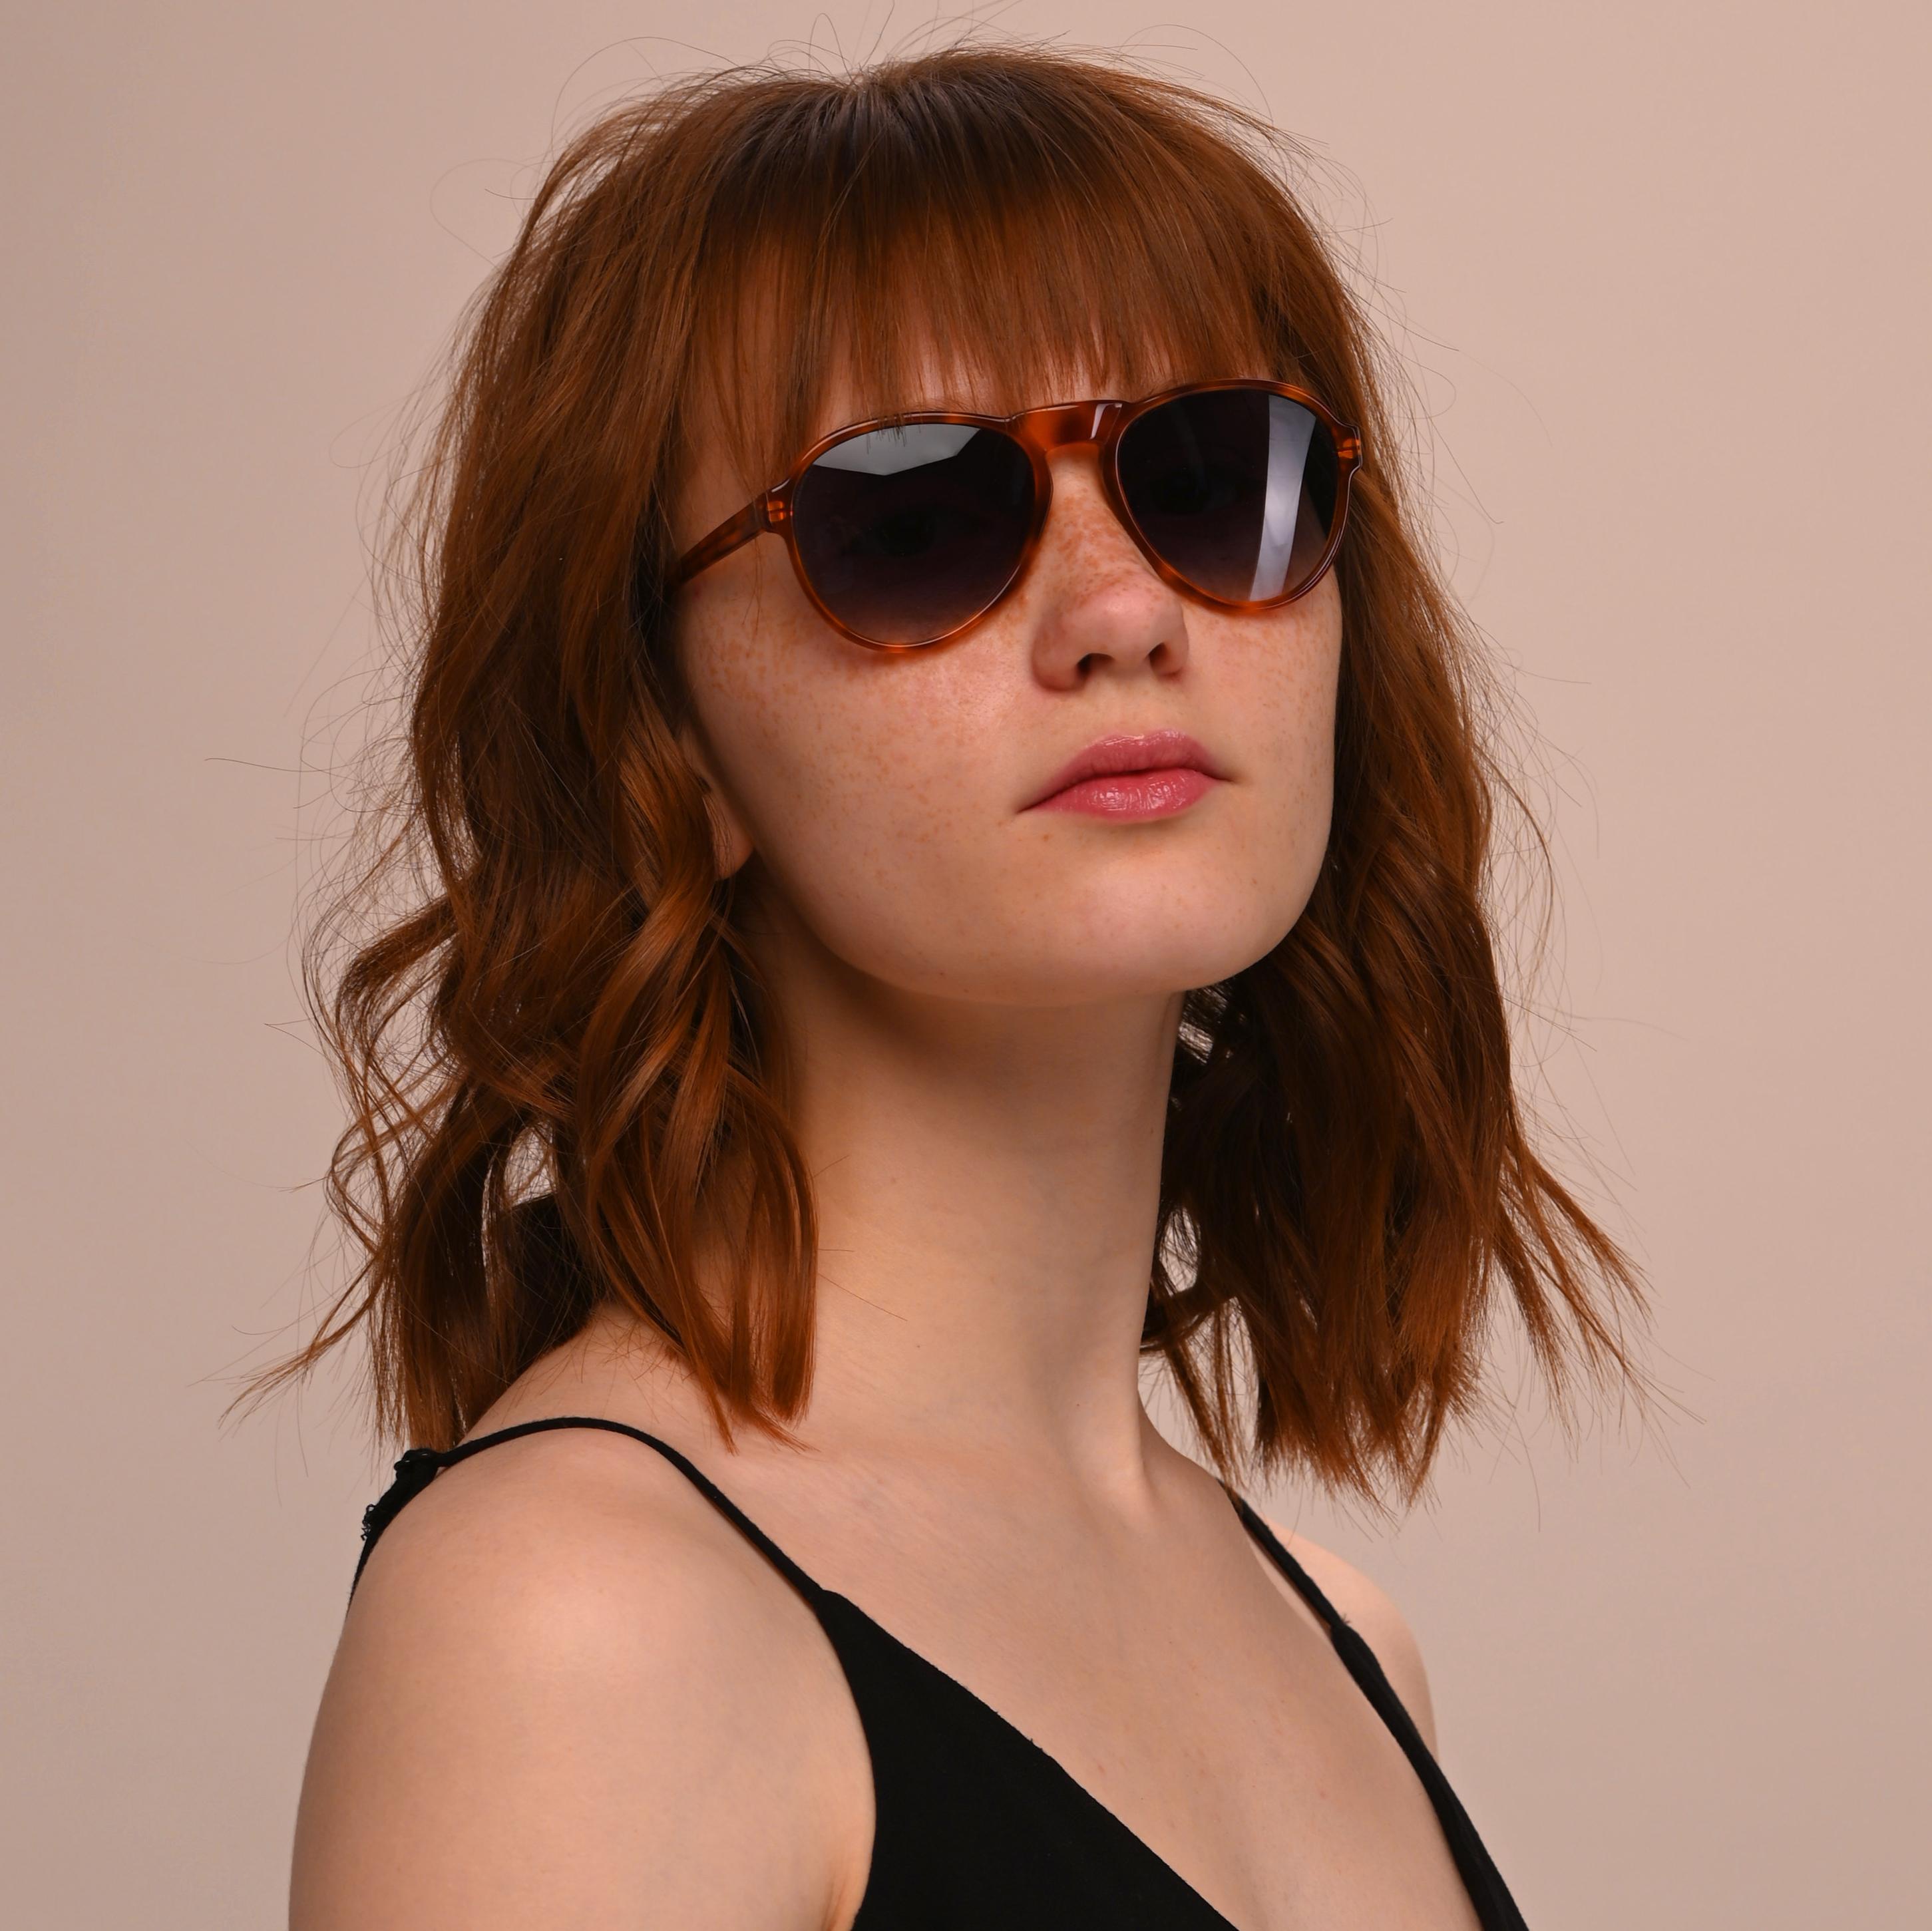 Bourgeois aviator vintage sunglasses, FRANCE In New Condition For Sale In Santa Clarita, CA